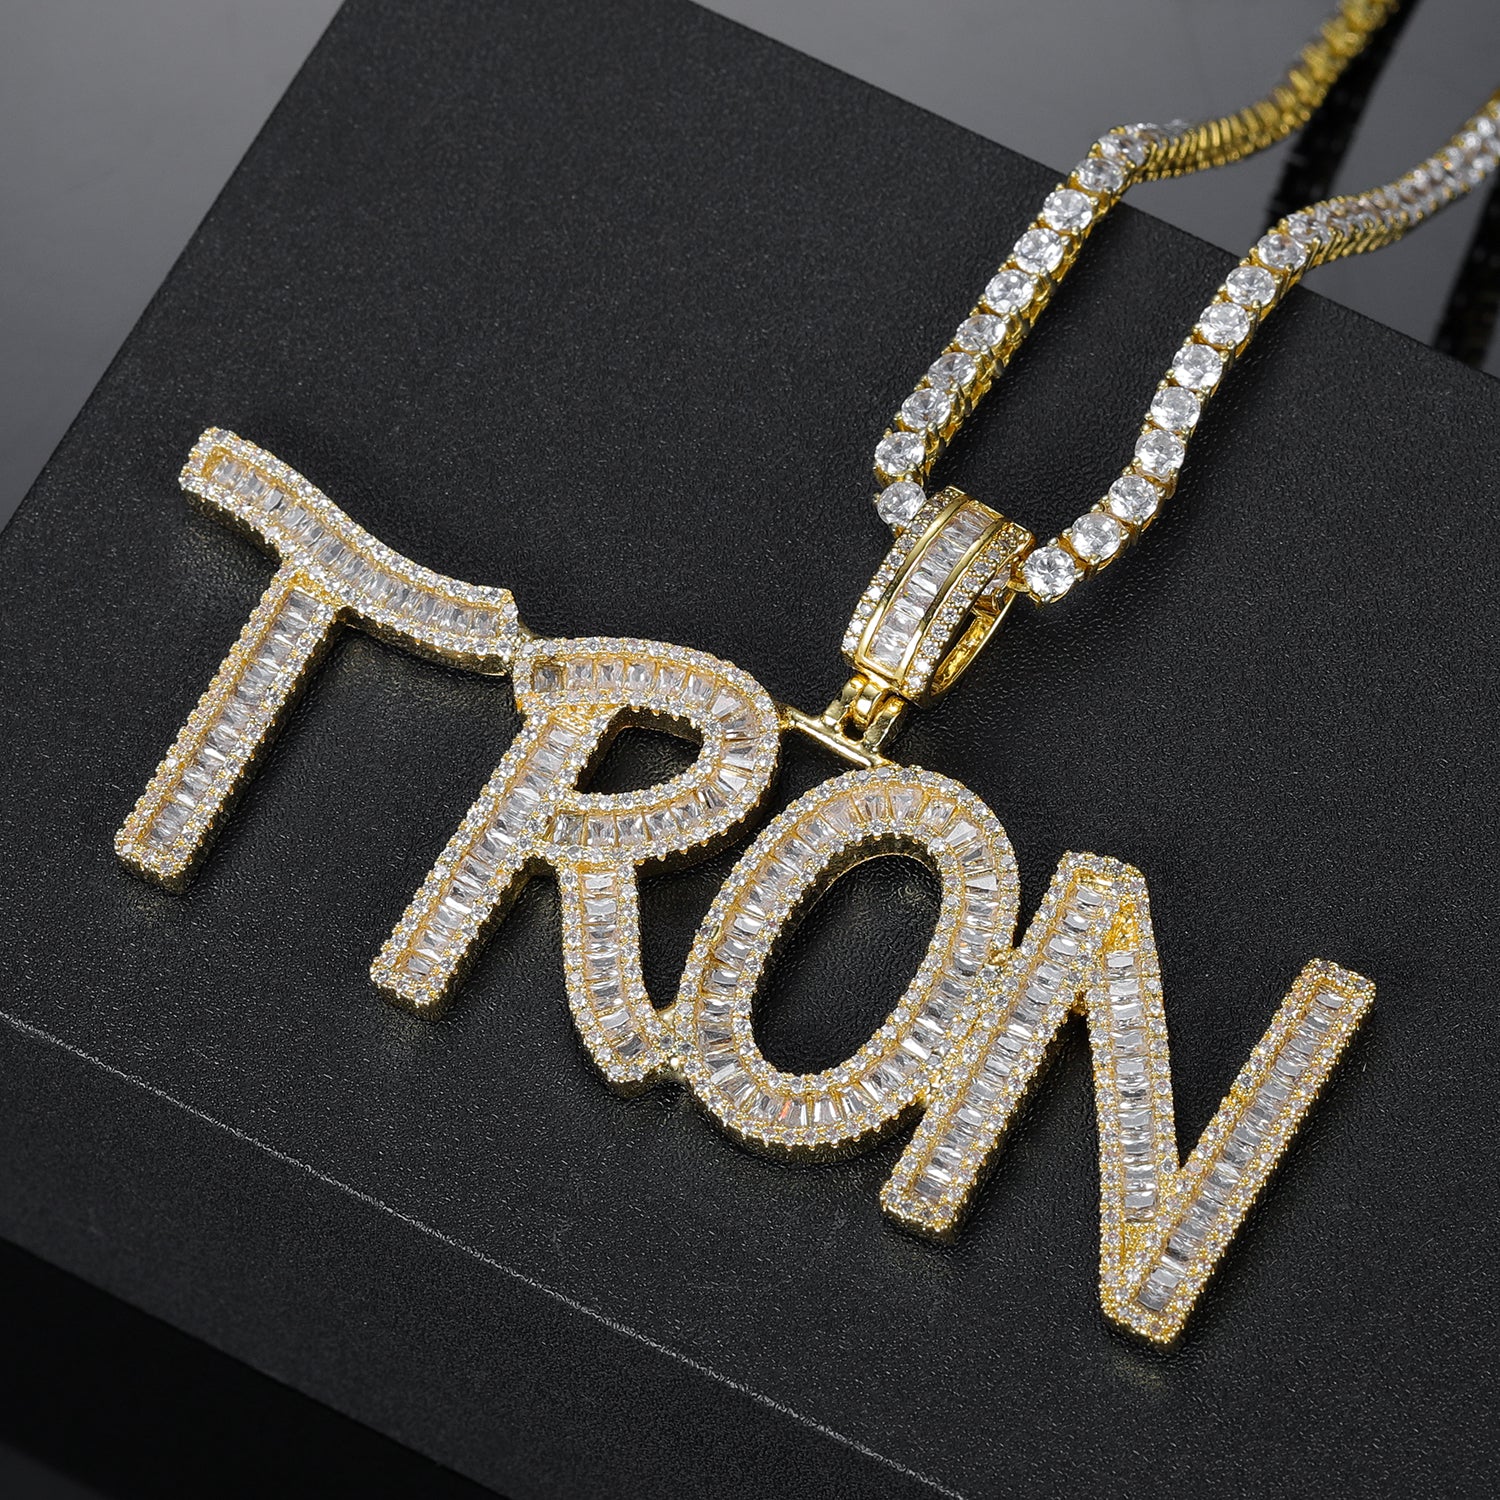 Peresonalized Baguette Letters Necklace